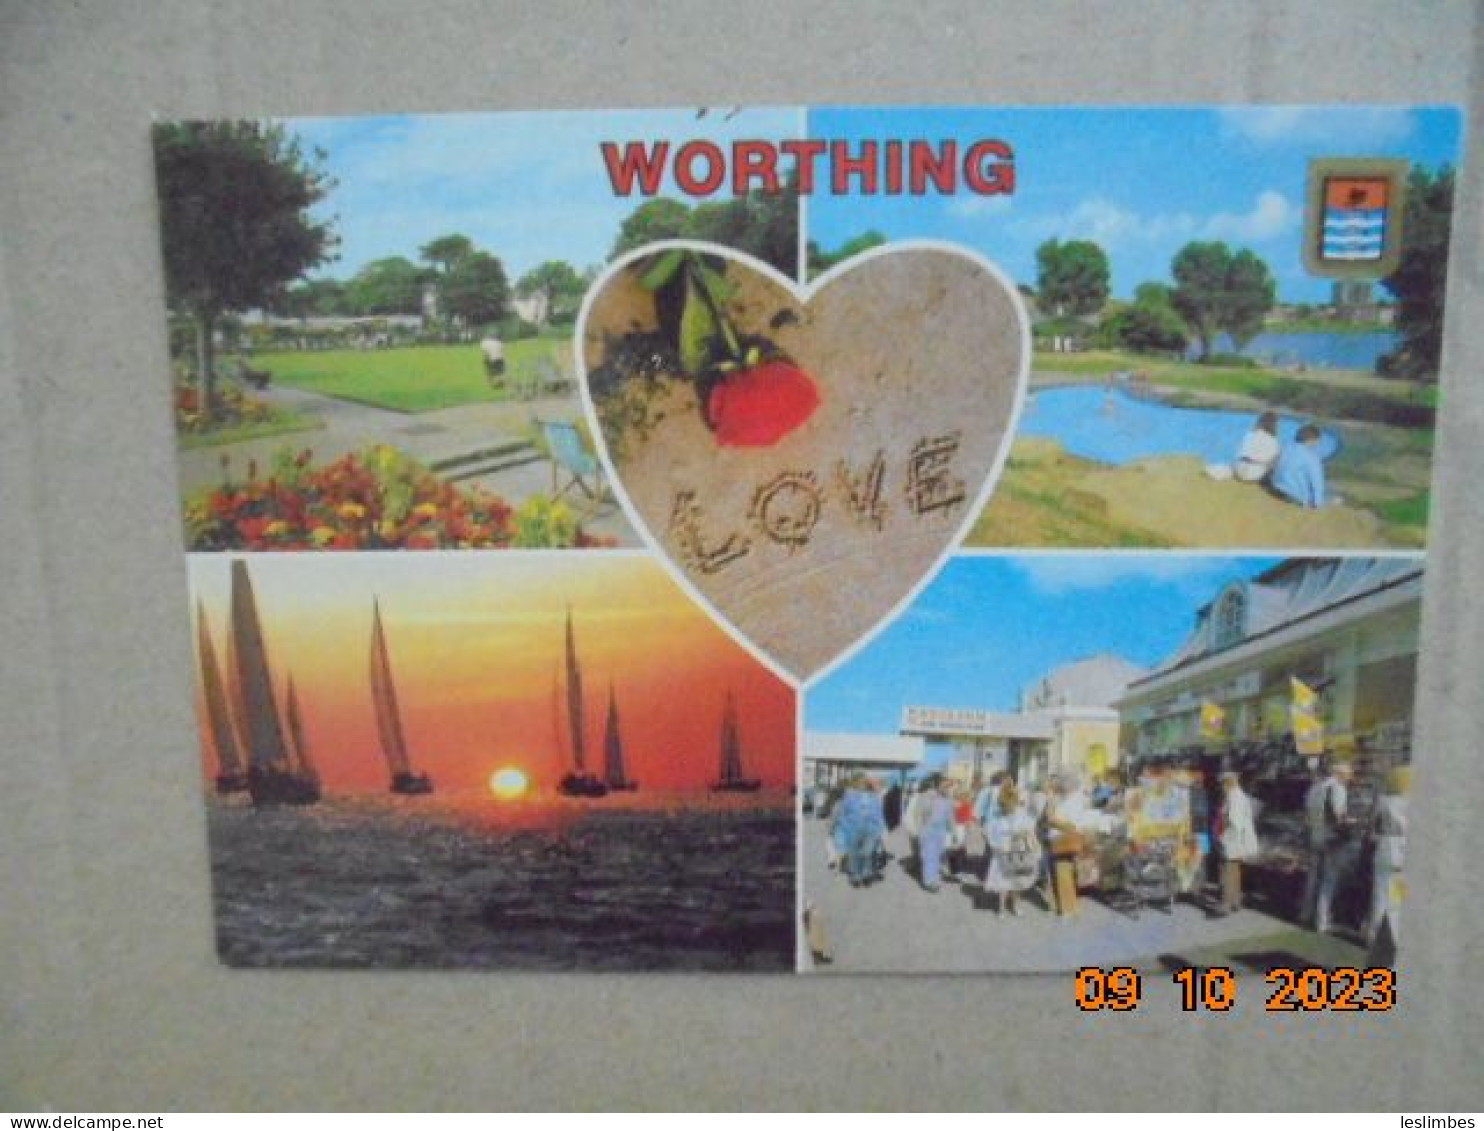 Greetings From Worthing. Leo Cards WO23 - Worthing